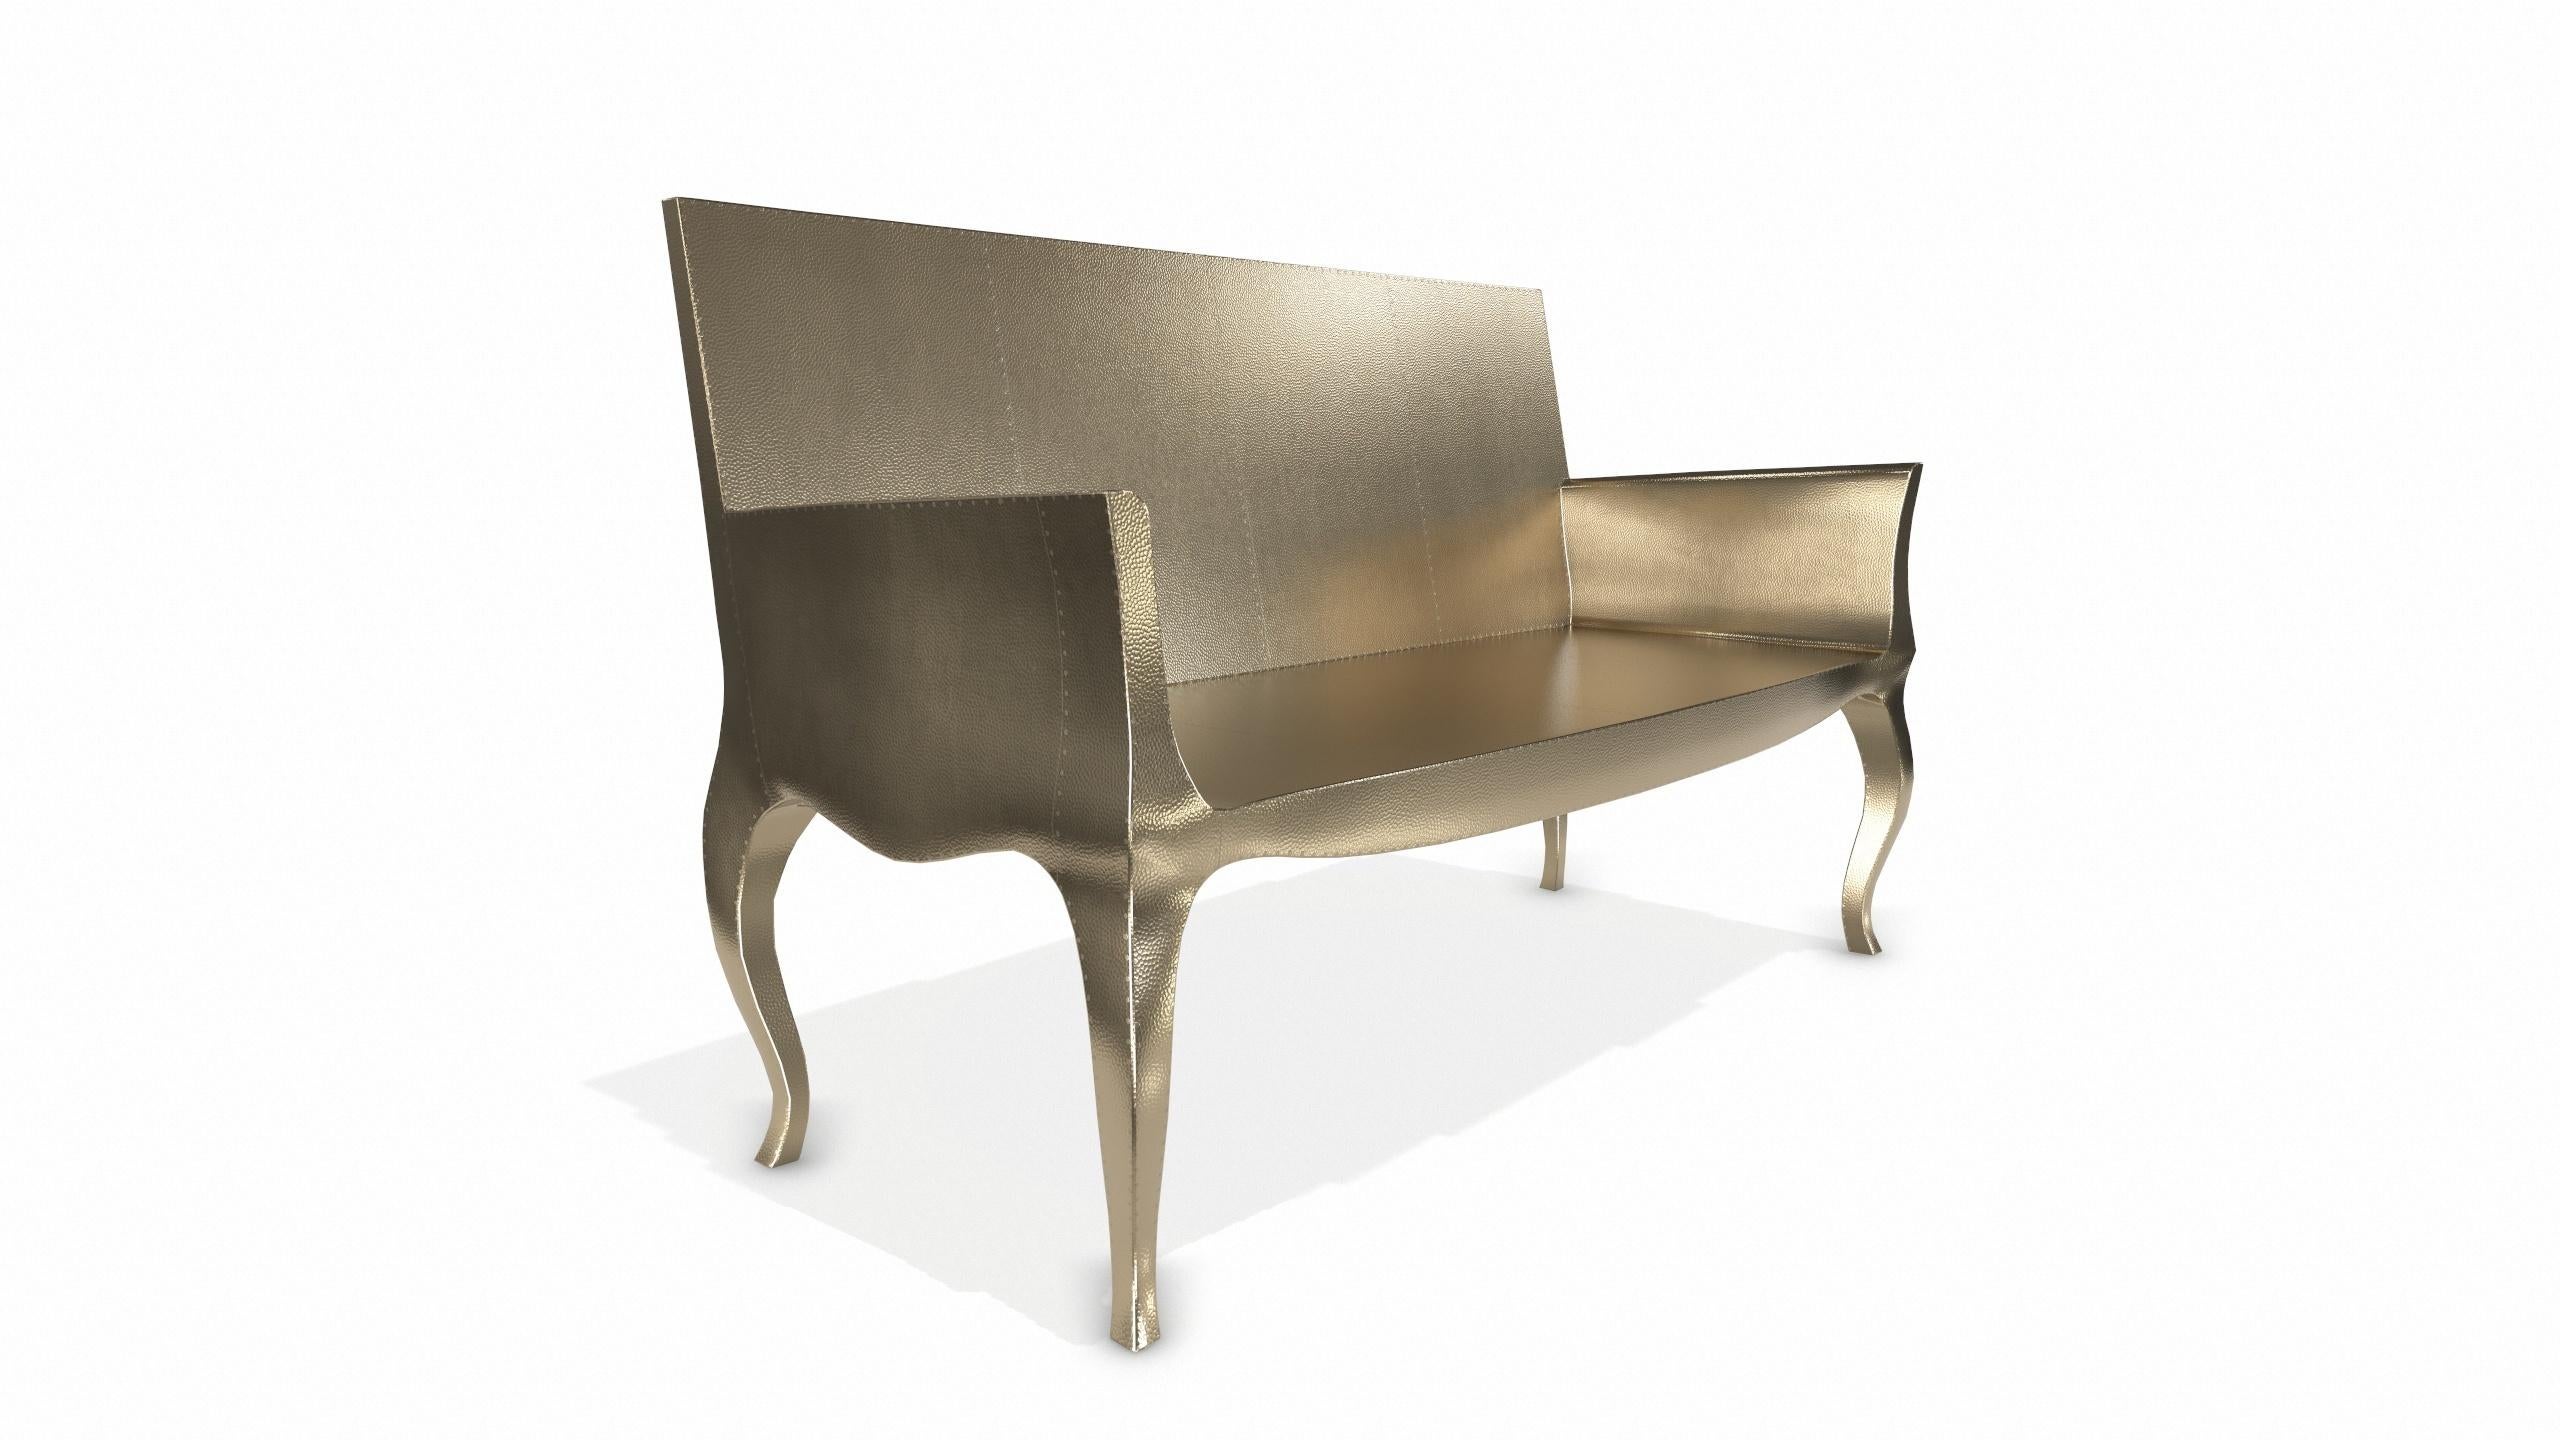 Louise Settee Art Deco Loveseats in Mid. Hammered Brass by Paul Mathieu In New Condition For Sale In New York, NY